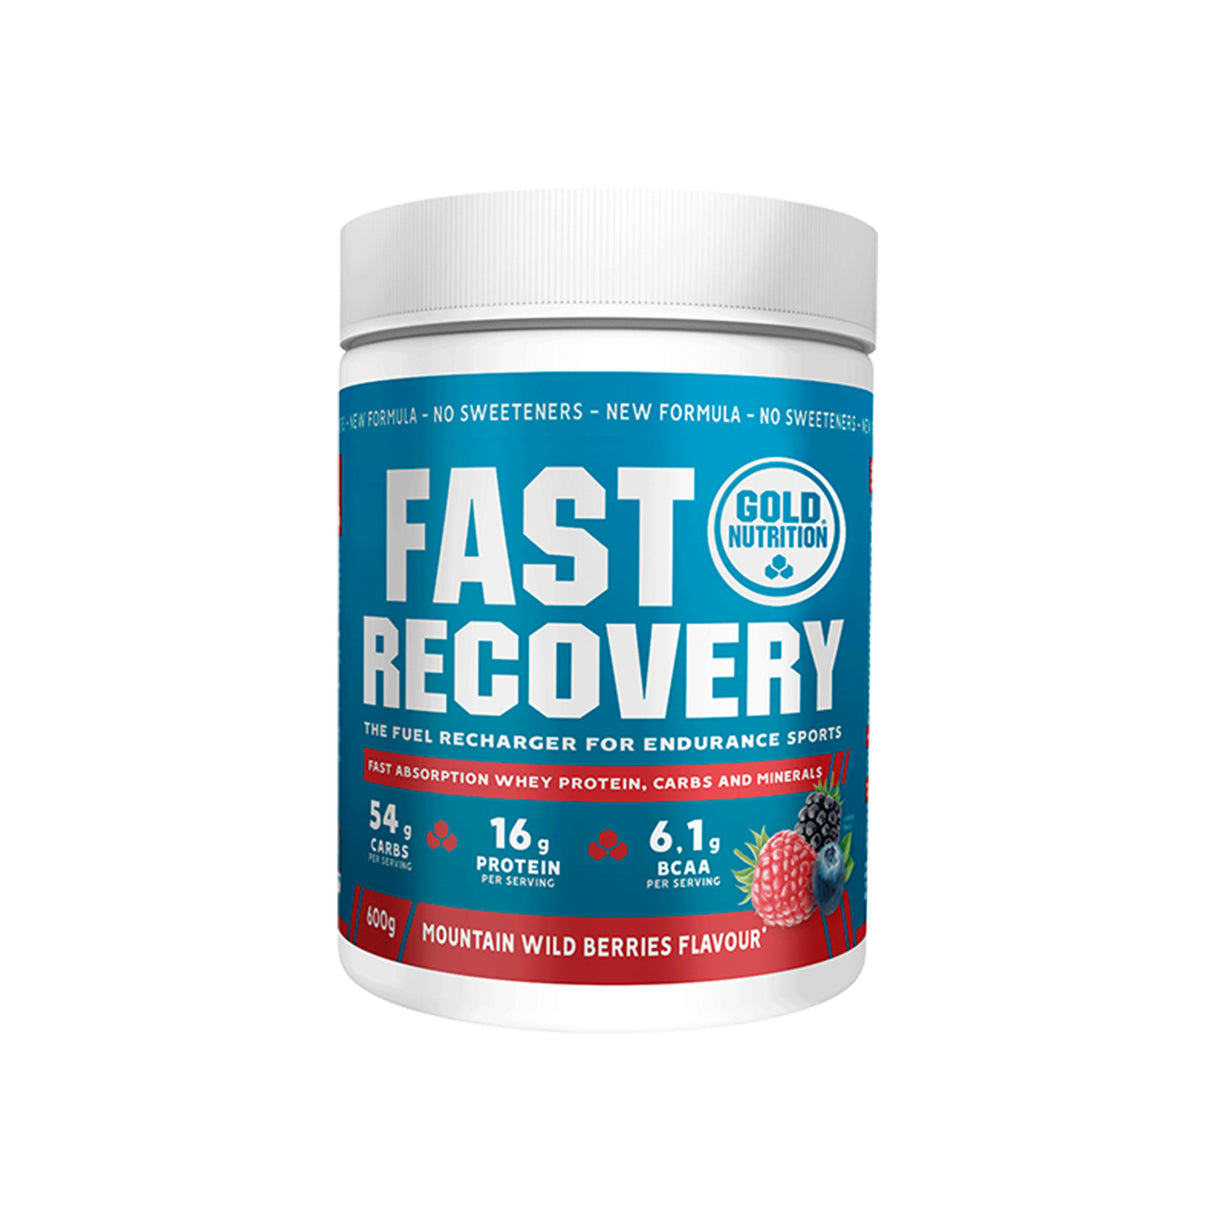 GOLD Nutrition Fast Recovery Wild Berries 600g